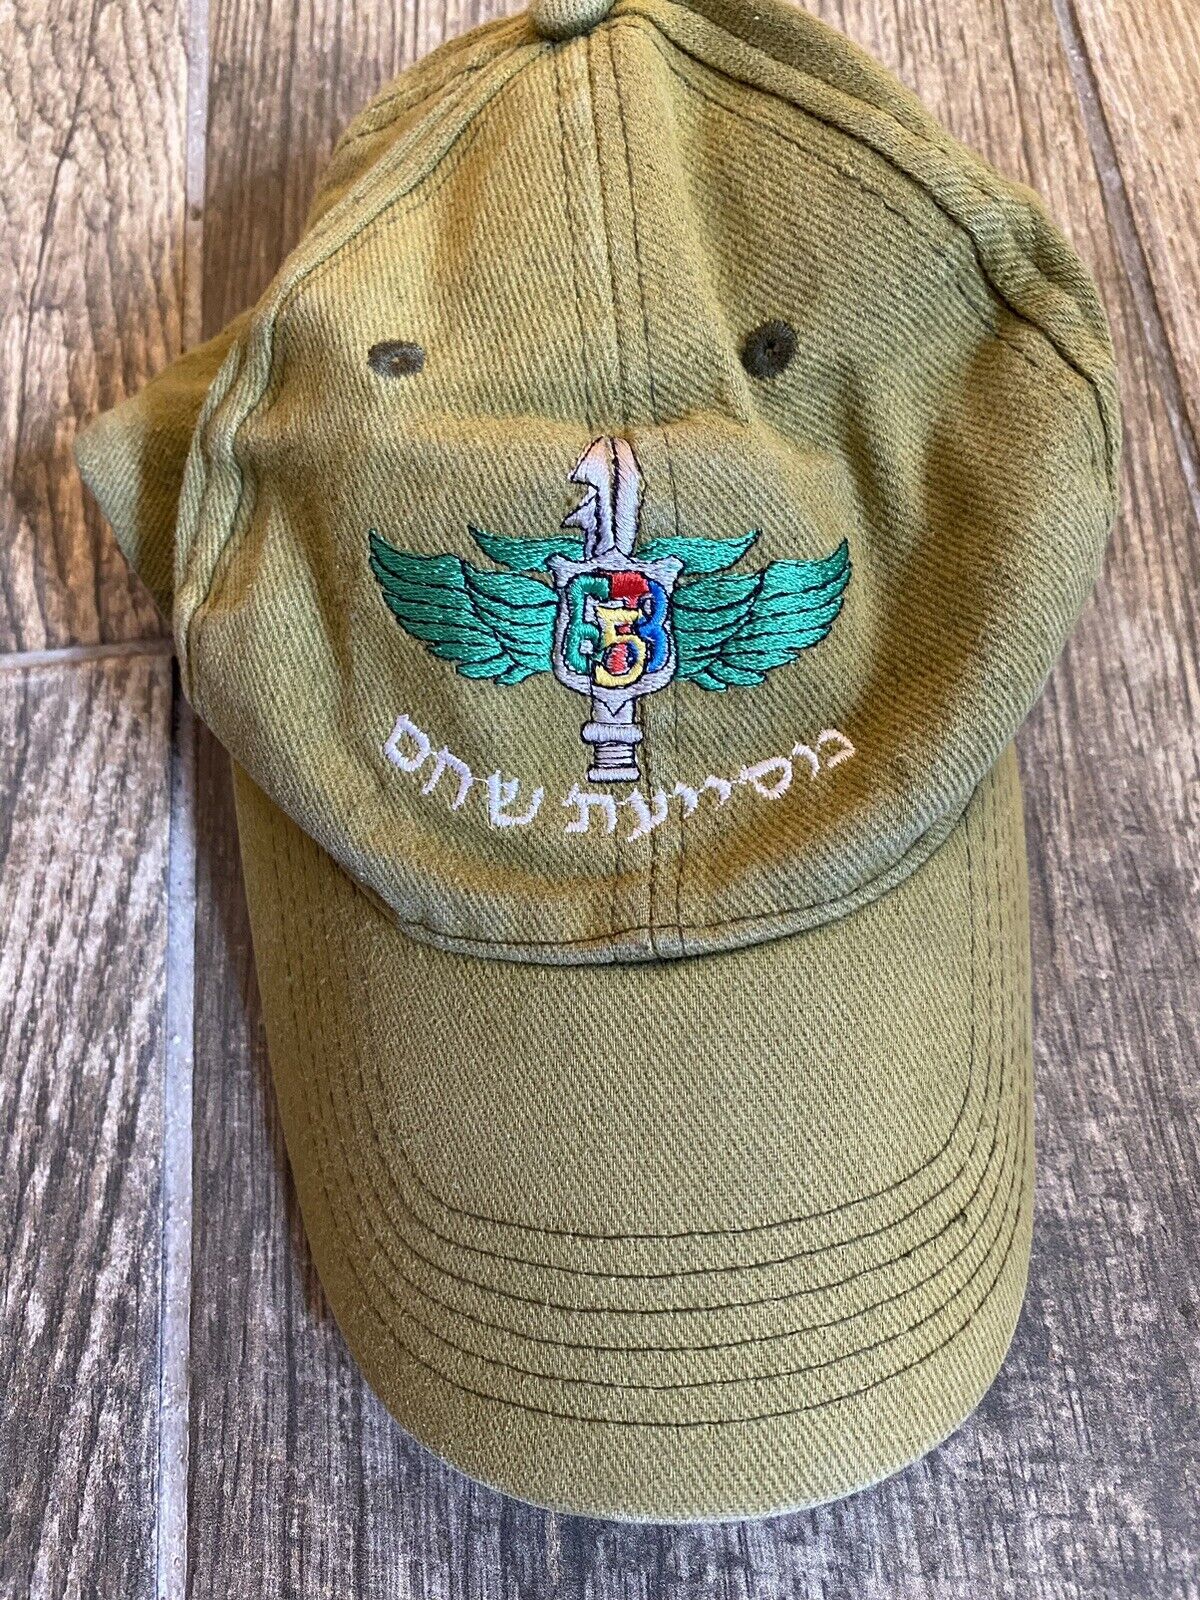 IDF Soldier 6573 Warriors Infantry Battalion Hat Israel Army Millitary ZAHAL